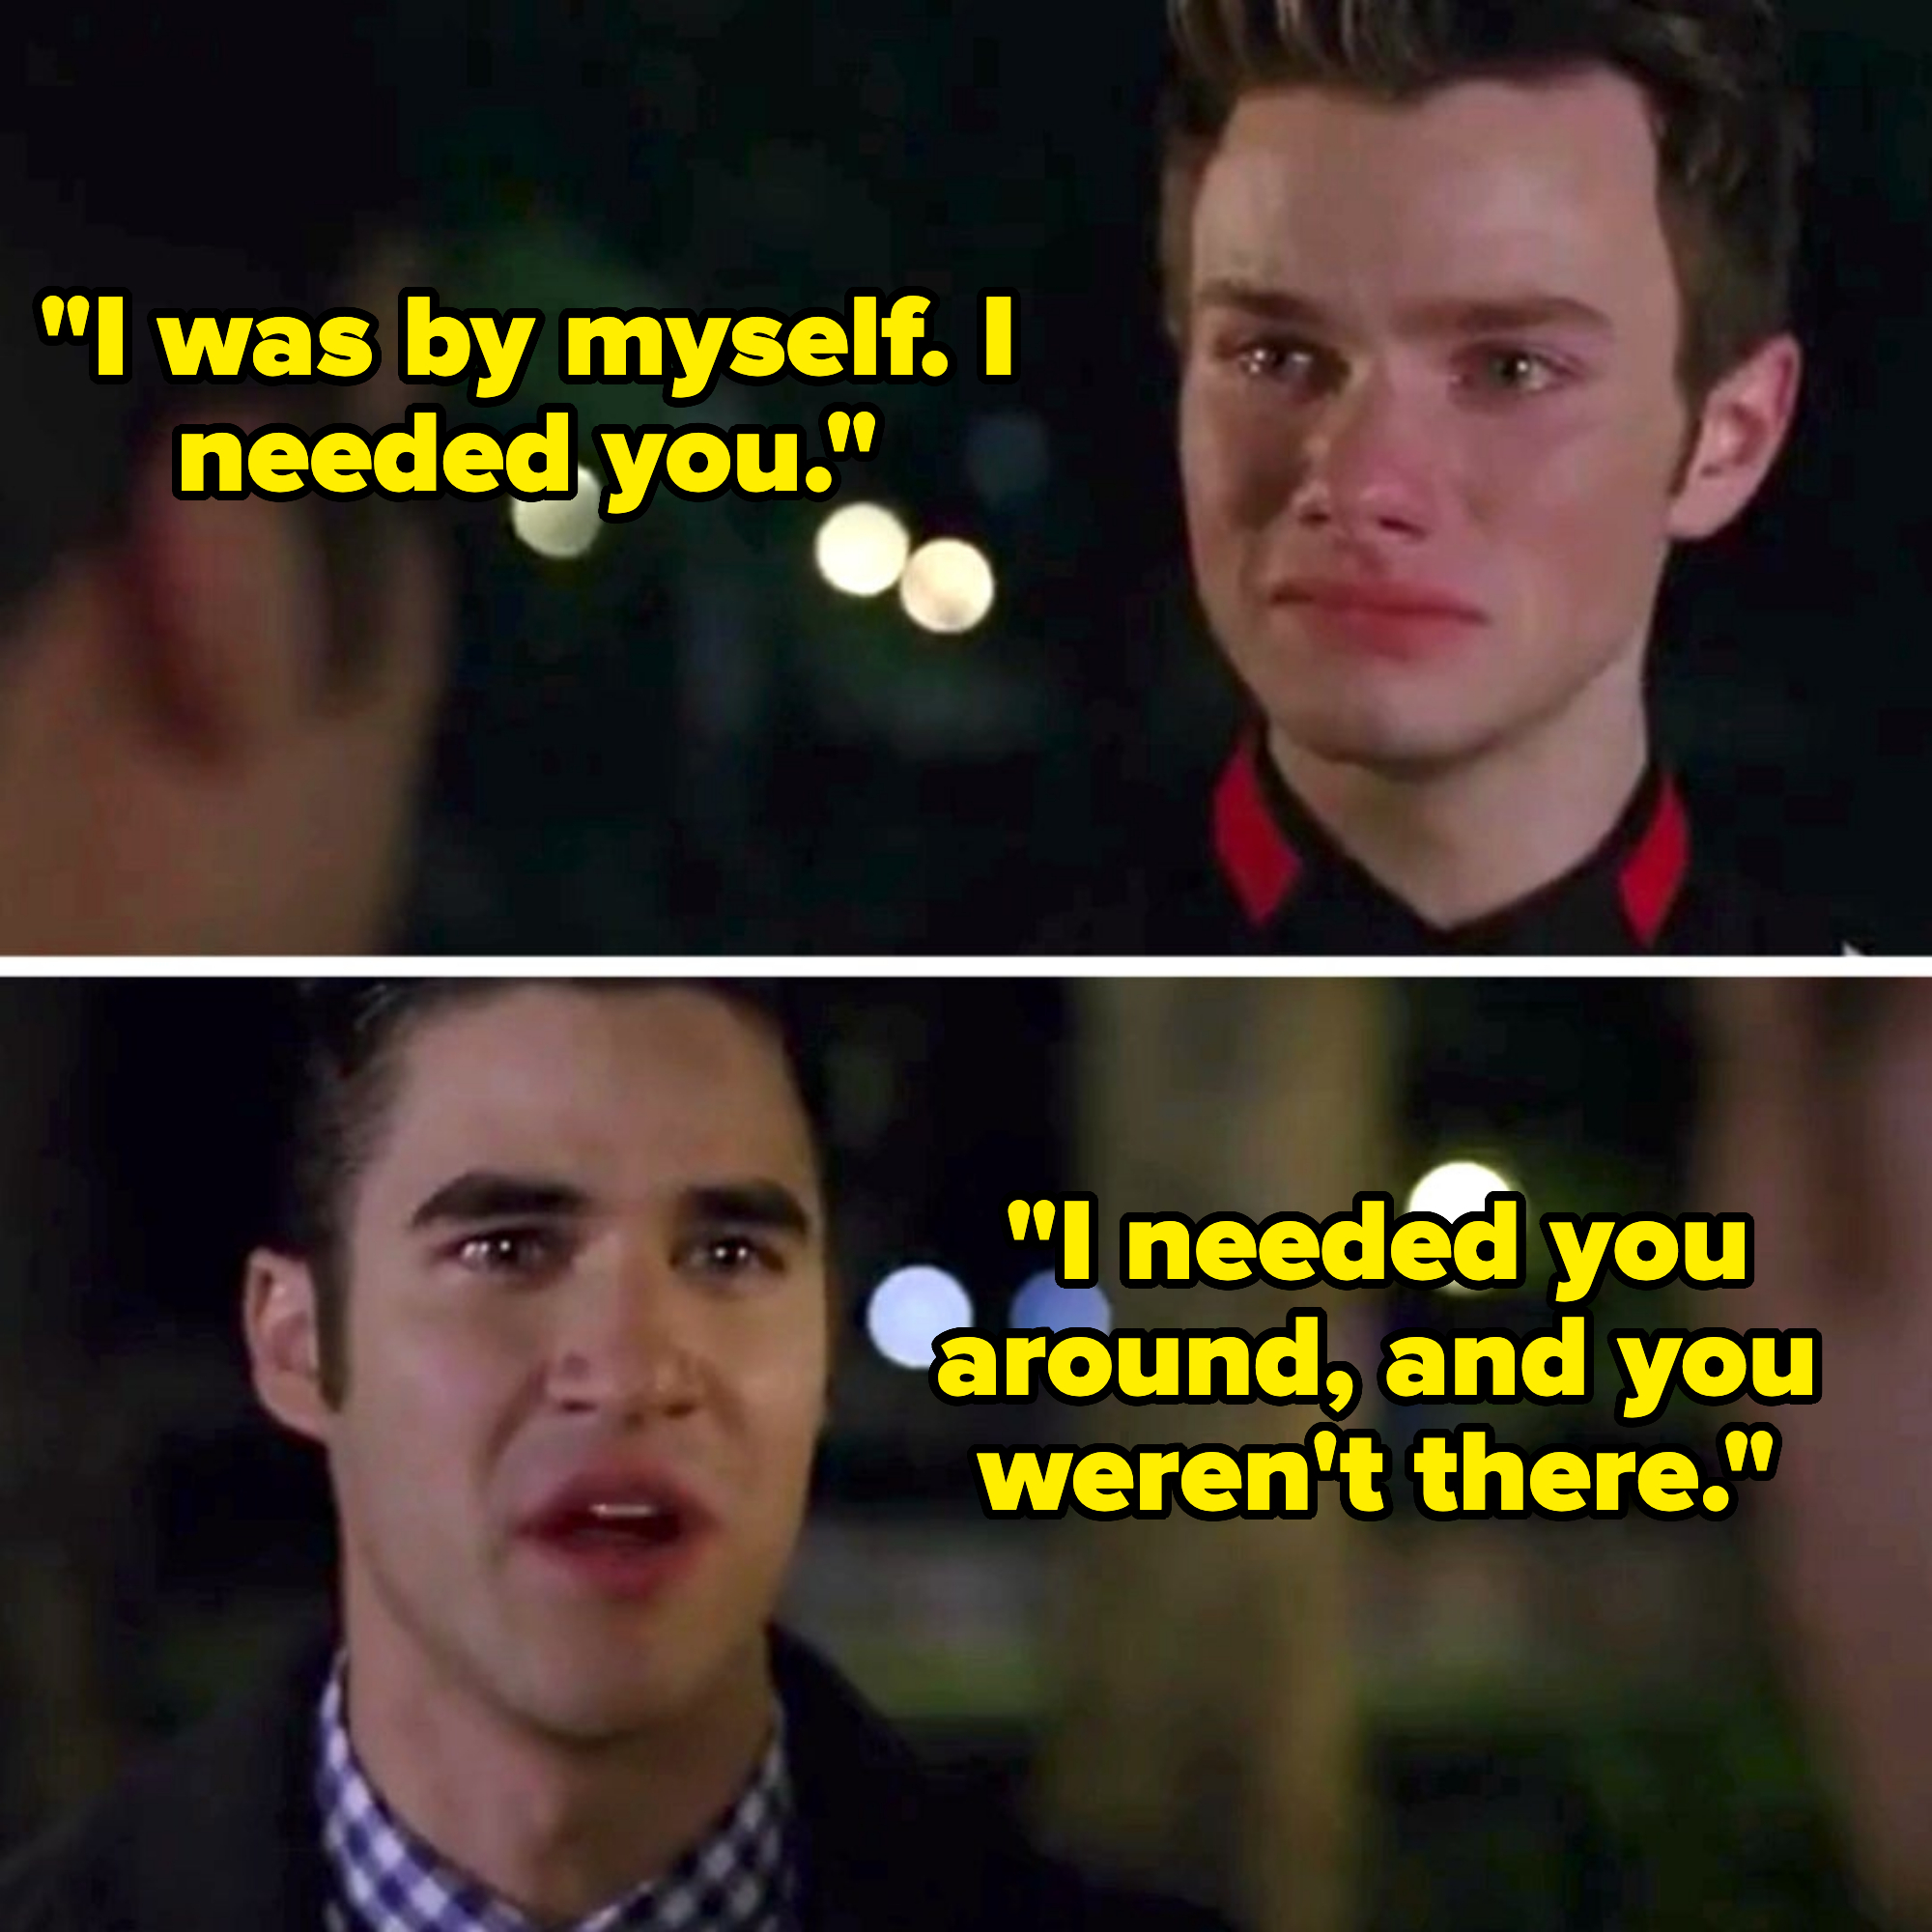 Chris Colfer and Darren Criss appear emotional in a tense, nighttime outdoor scene. Colfer has tears in his eyes, while Criss speaks with a distressed expression